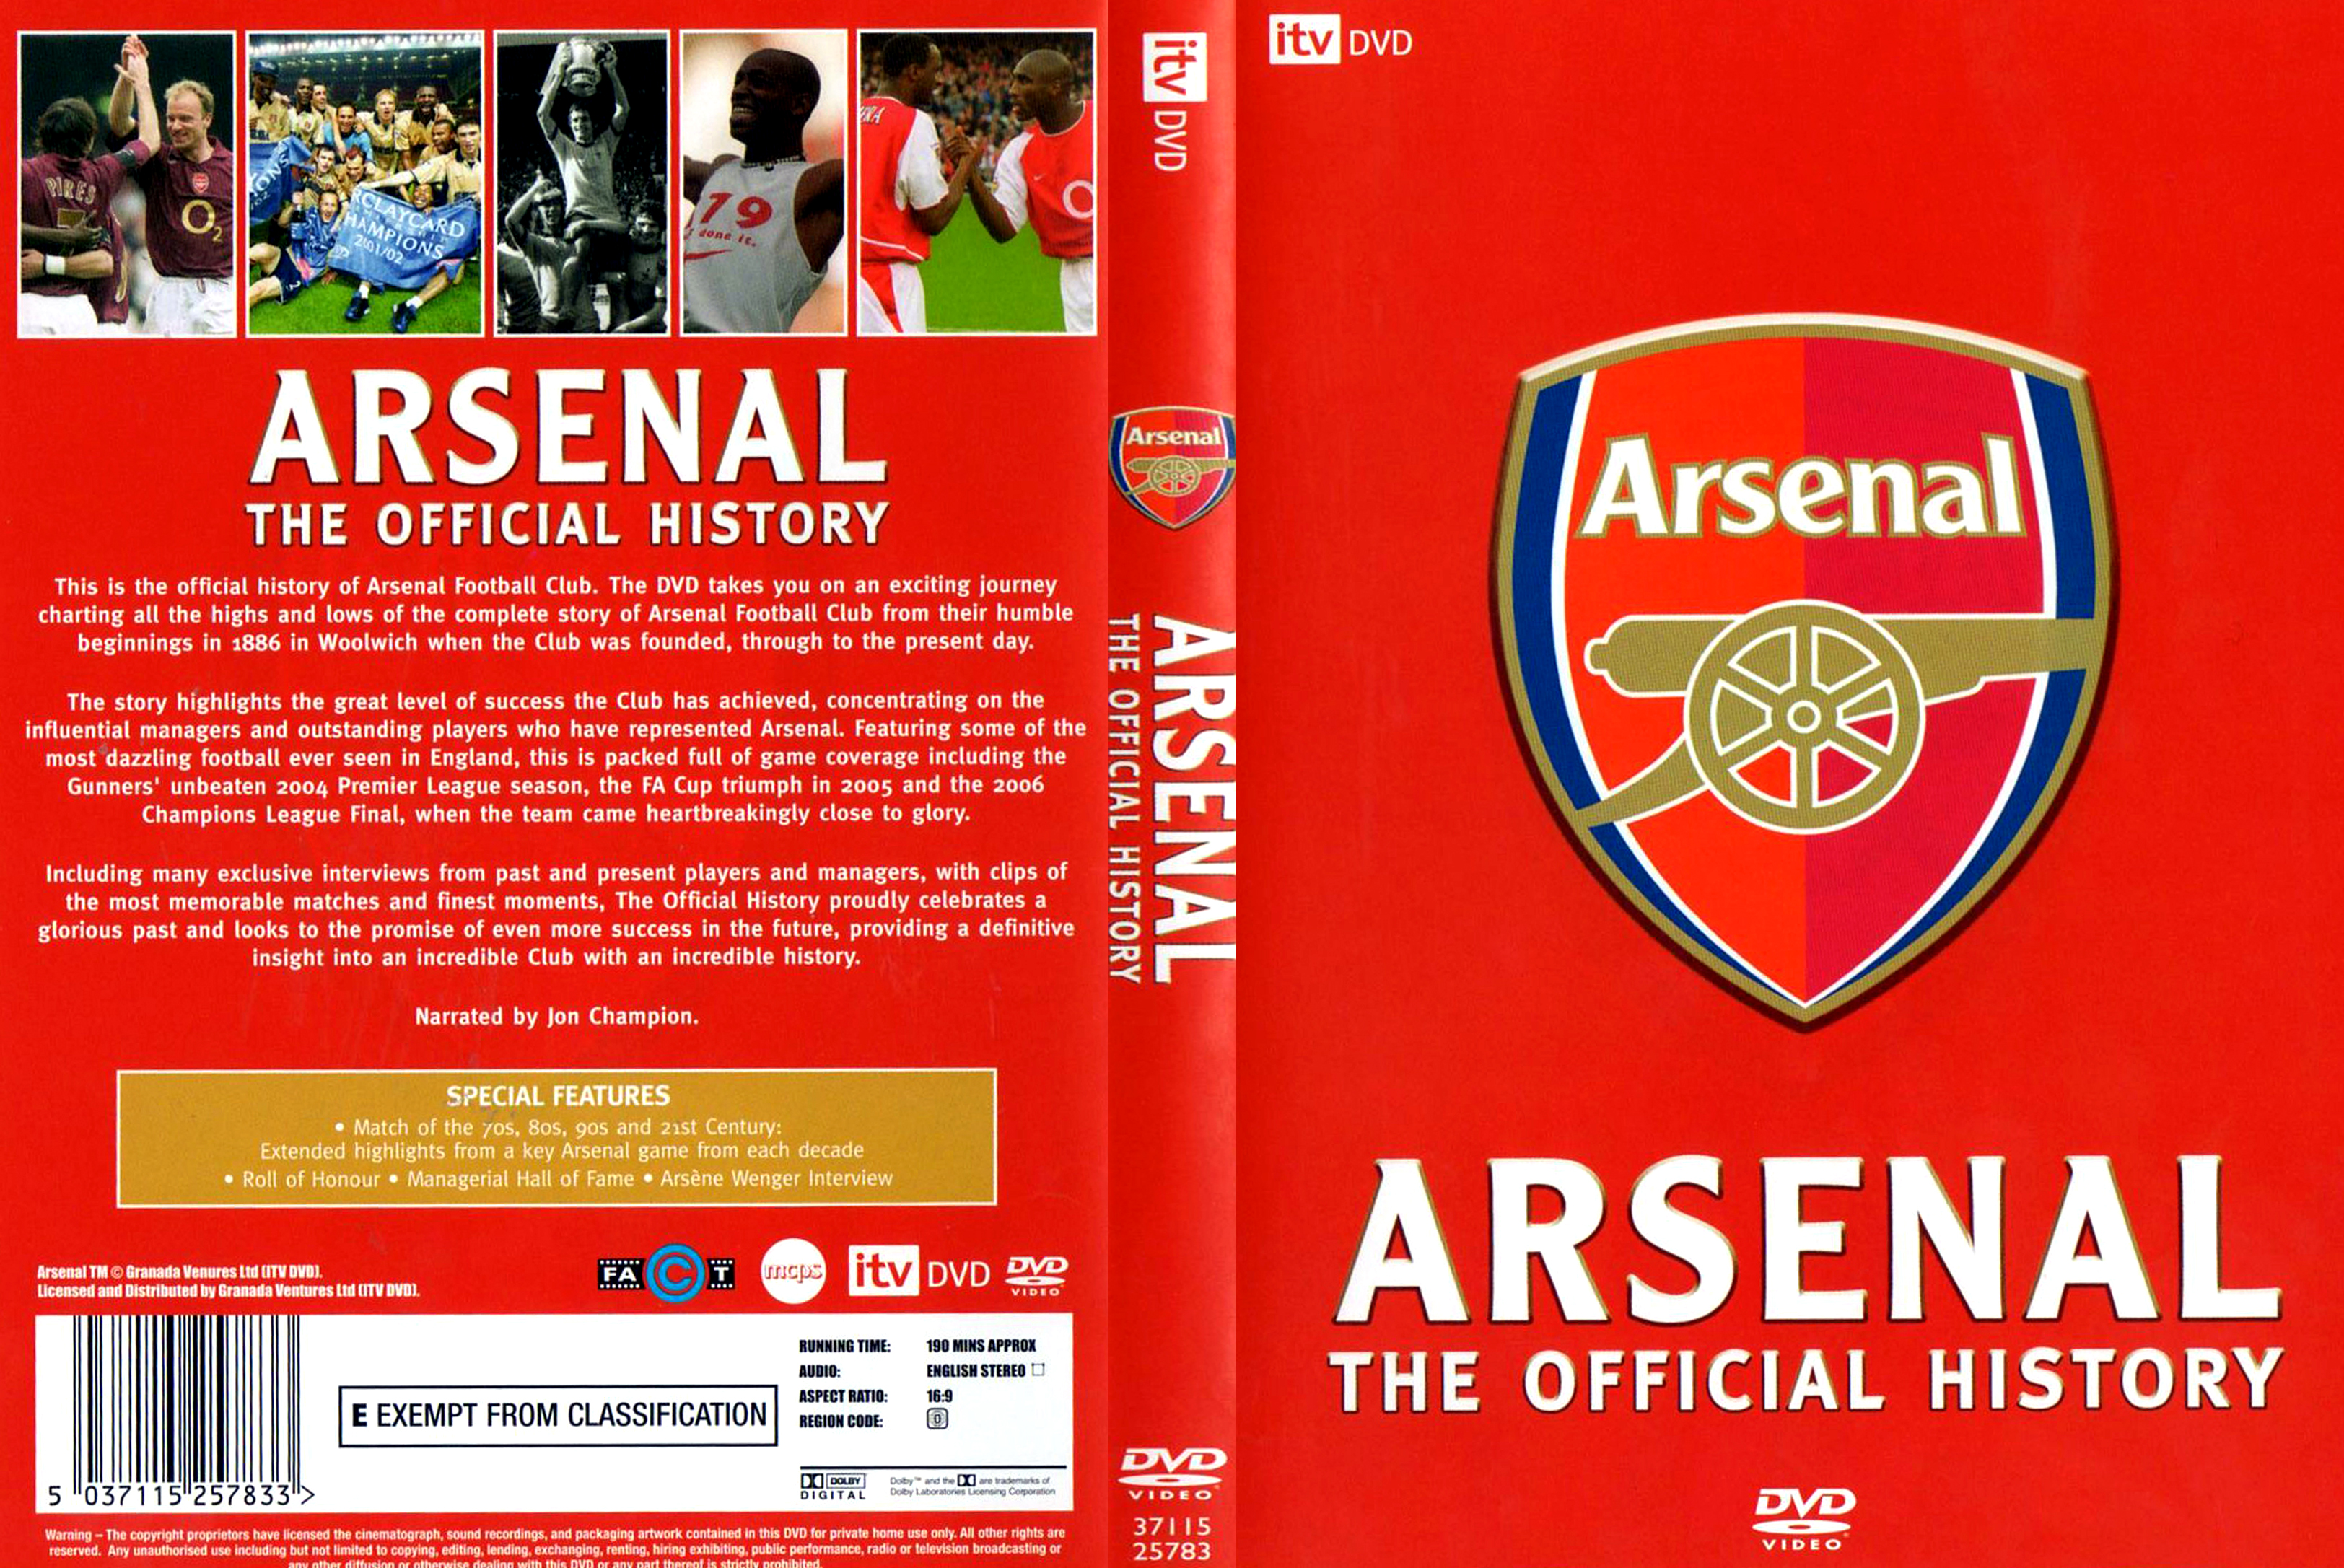 Jaquette DVD Arsenal The official history